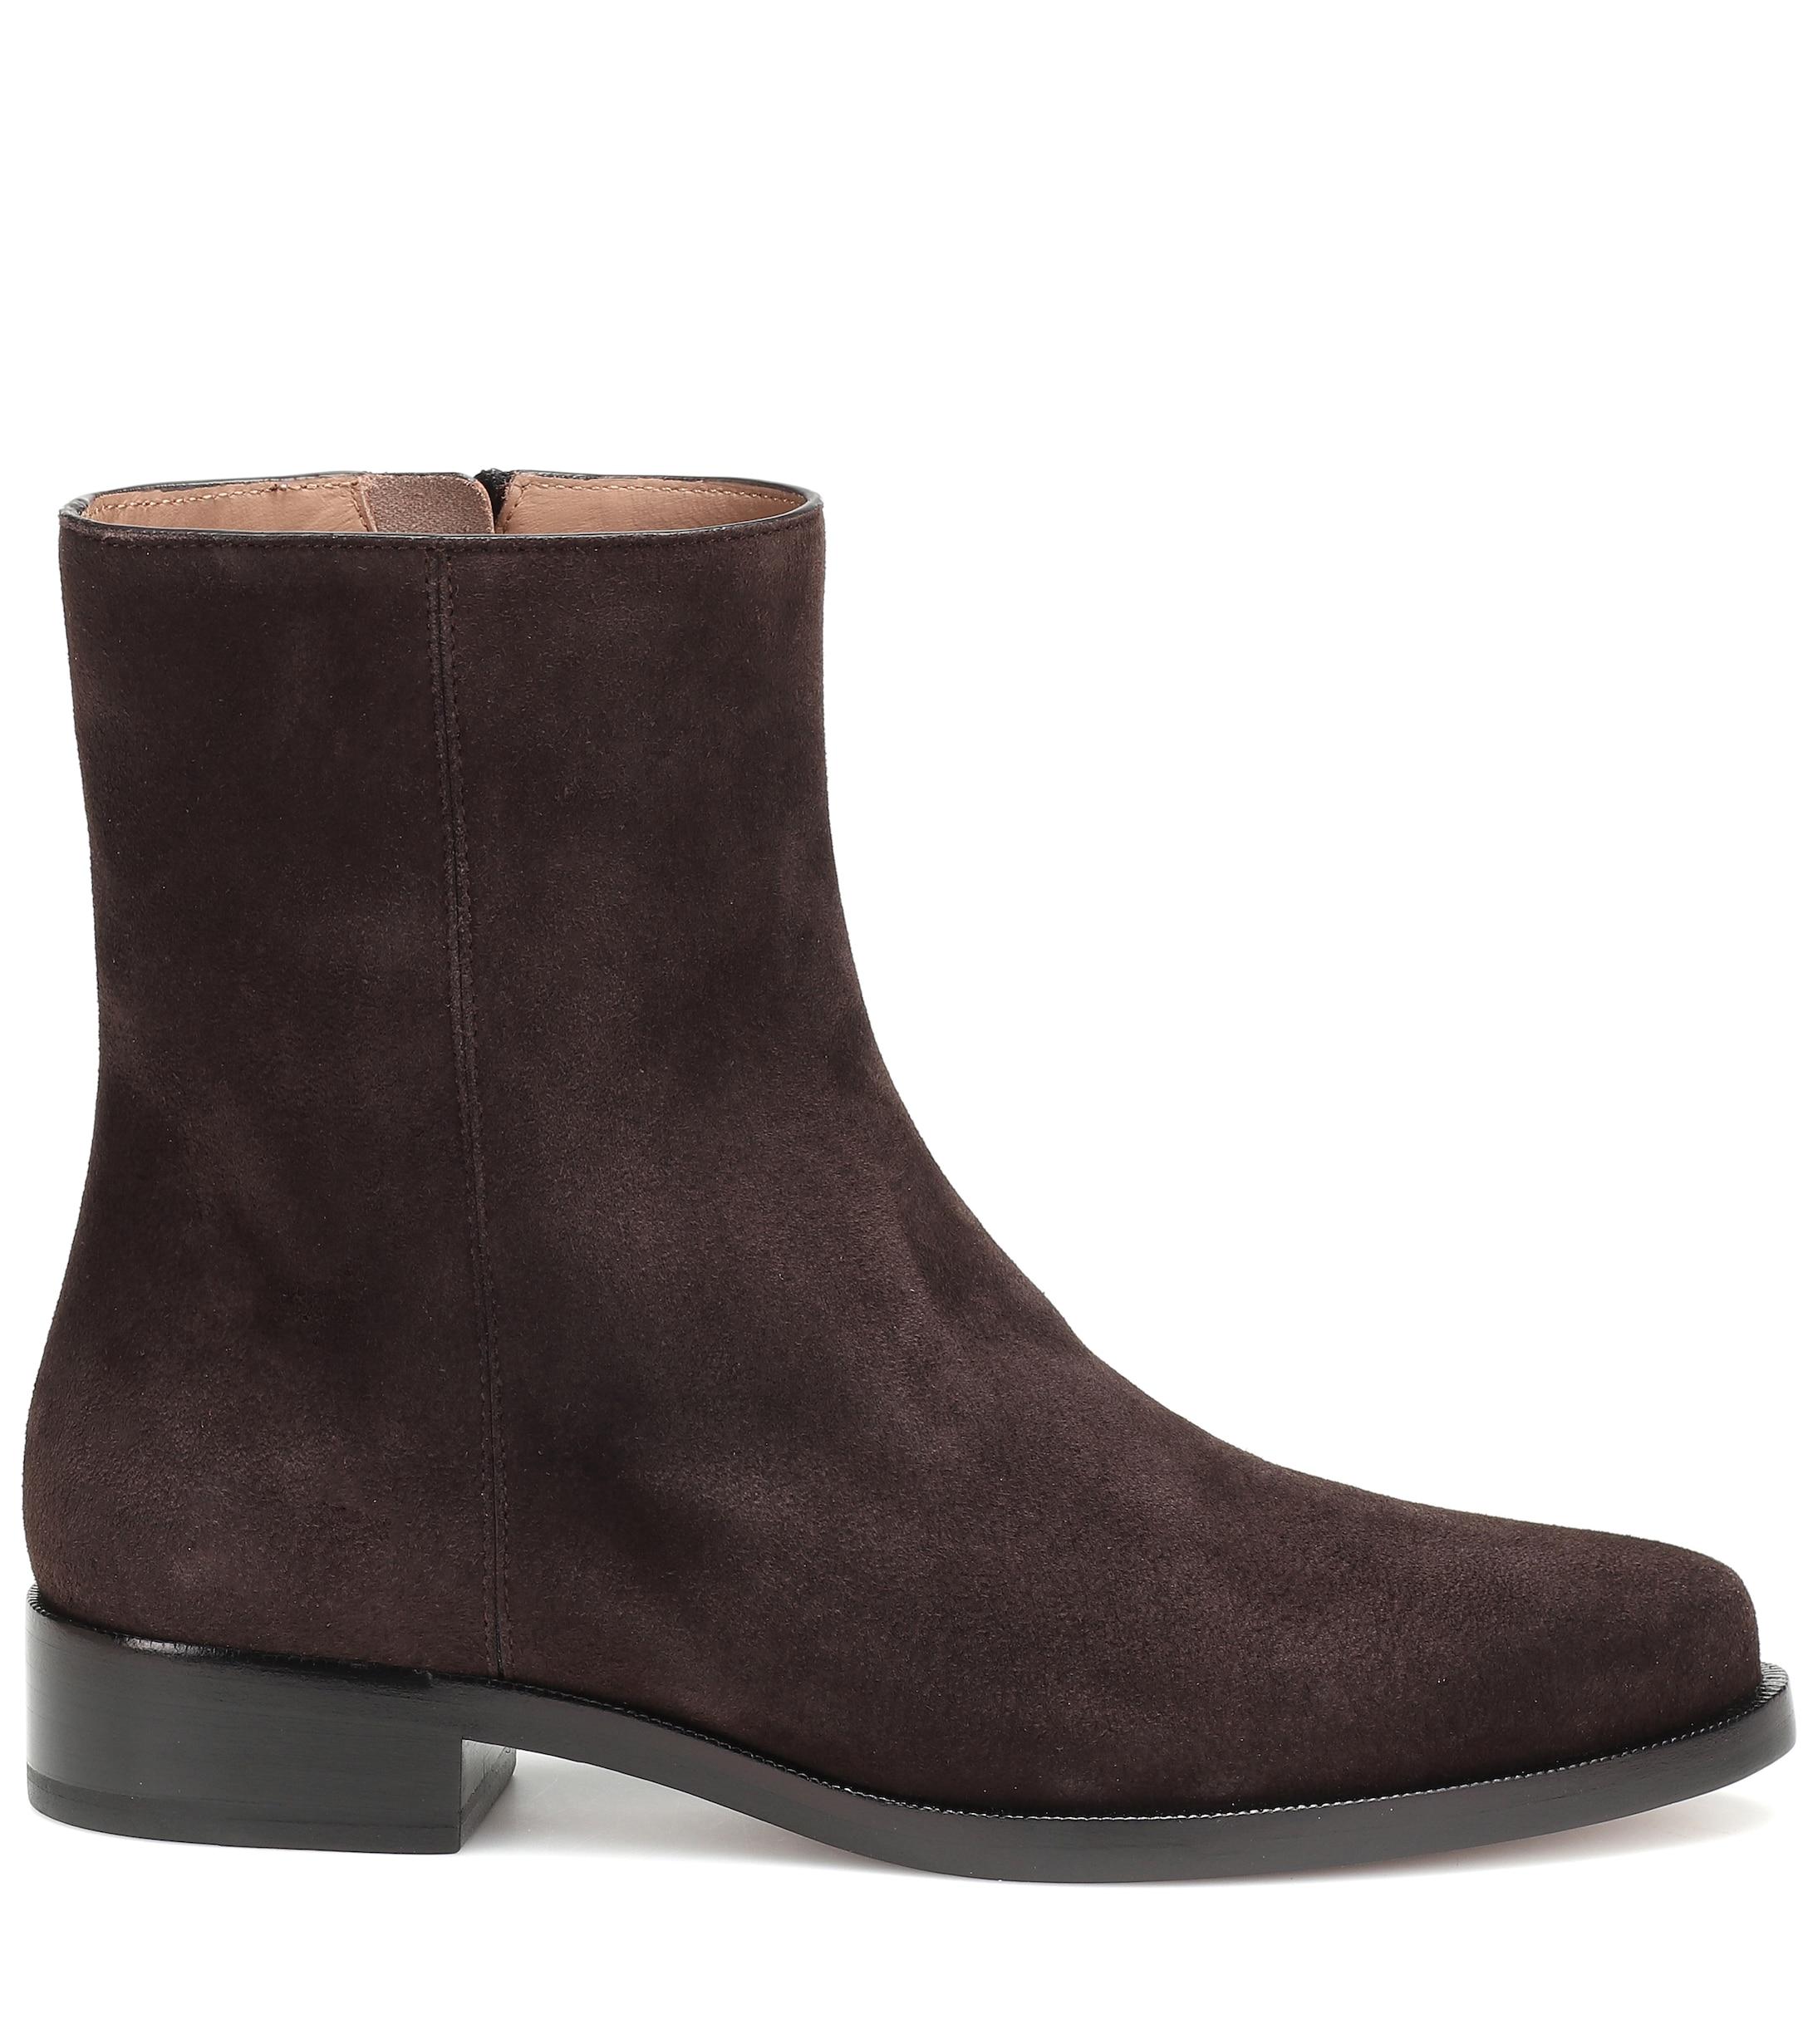 LEGRES Suede Ankle Boots in Brown - Lyst